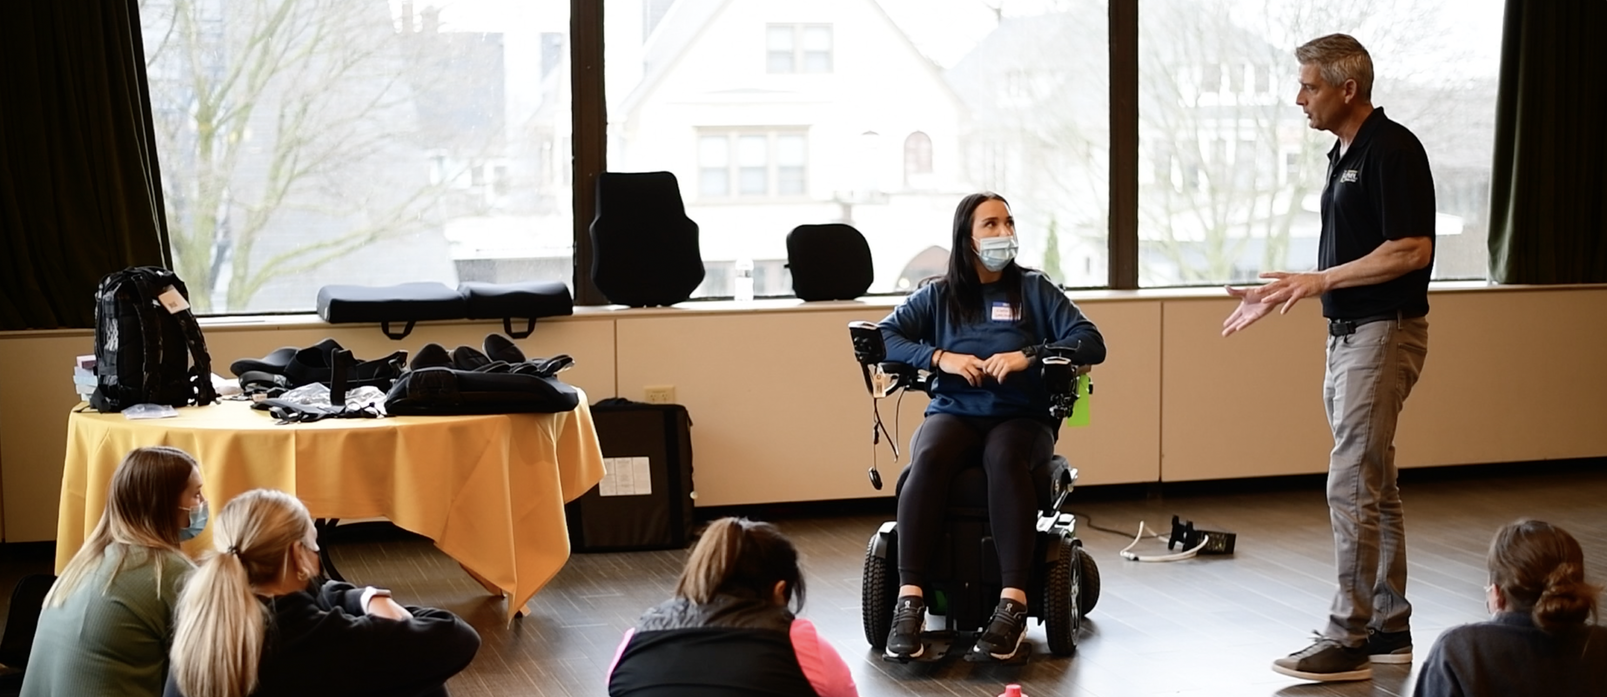 Image of Wheelchair Vendor Lecturing on Different Wheelchair Cushions